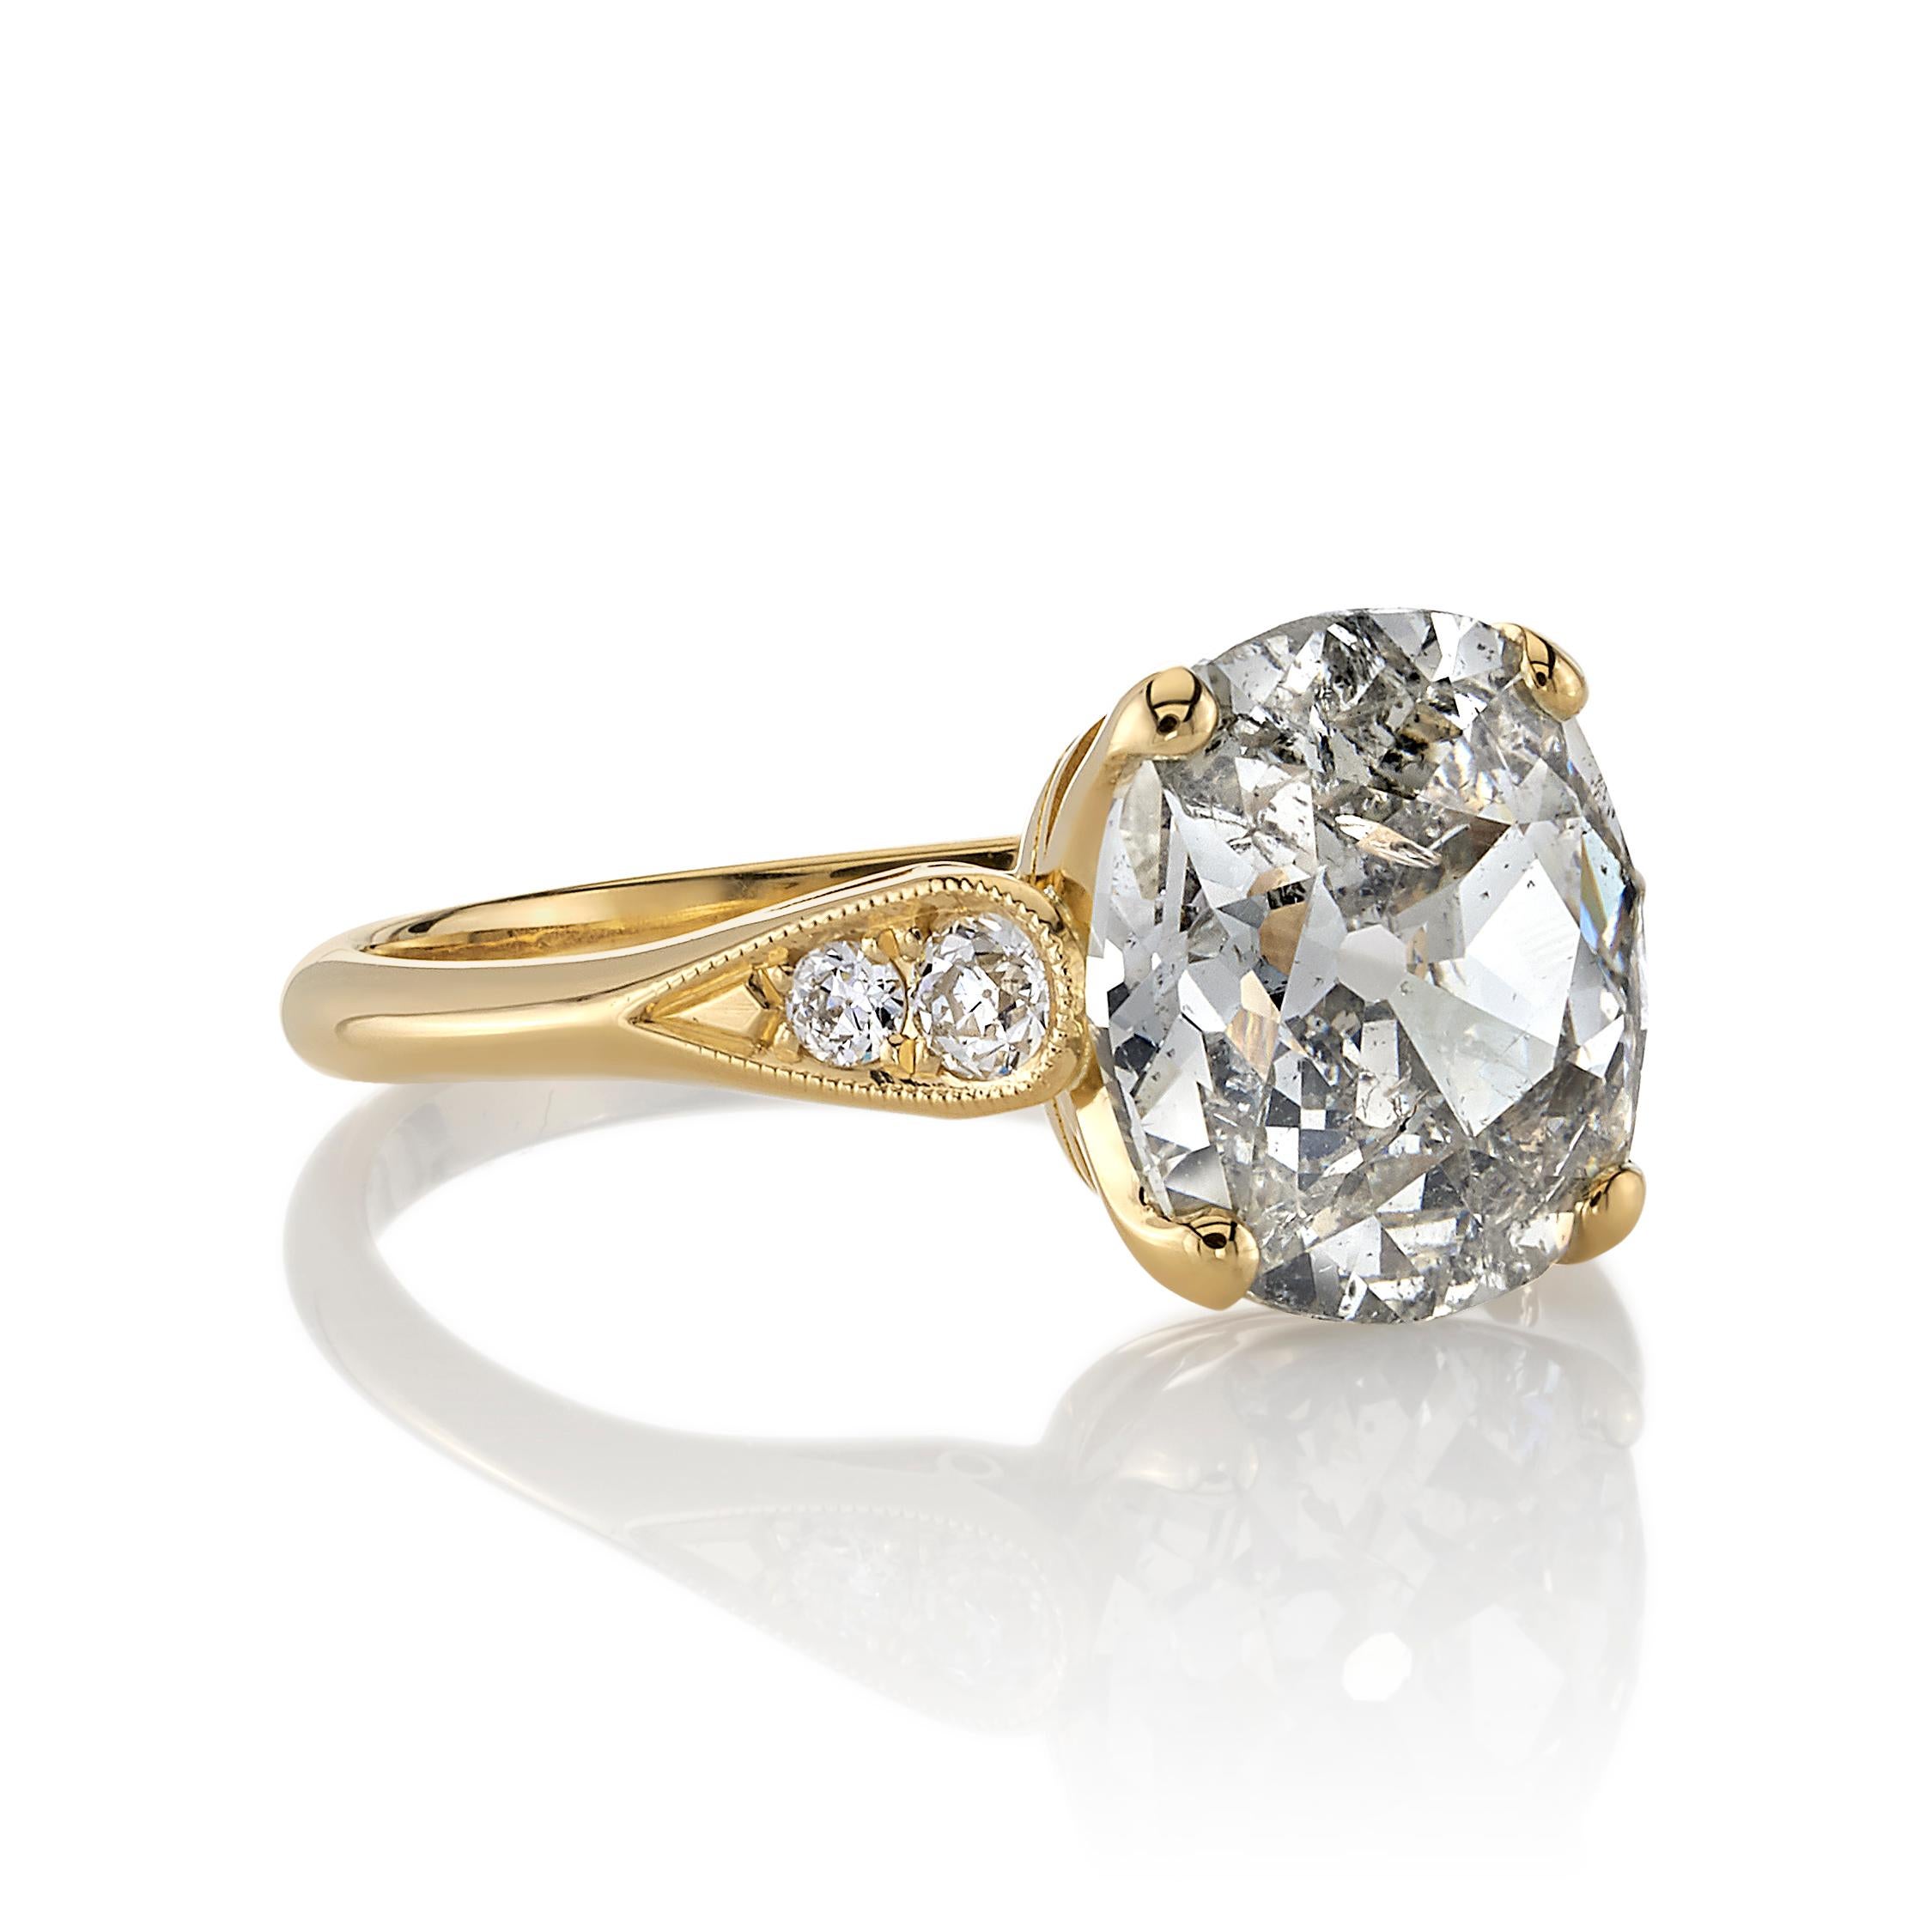 3.03ctw J/I2 GIA certified antique cushion cut diamond with 0.15ctw old European cut accent diamonds set in a handcrafted 18K yellow gold mounting.

Ring is currently a size 6 and can be sized to fit.

Our jewelry is made locally in Los Angeles and